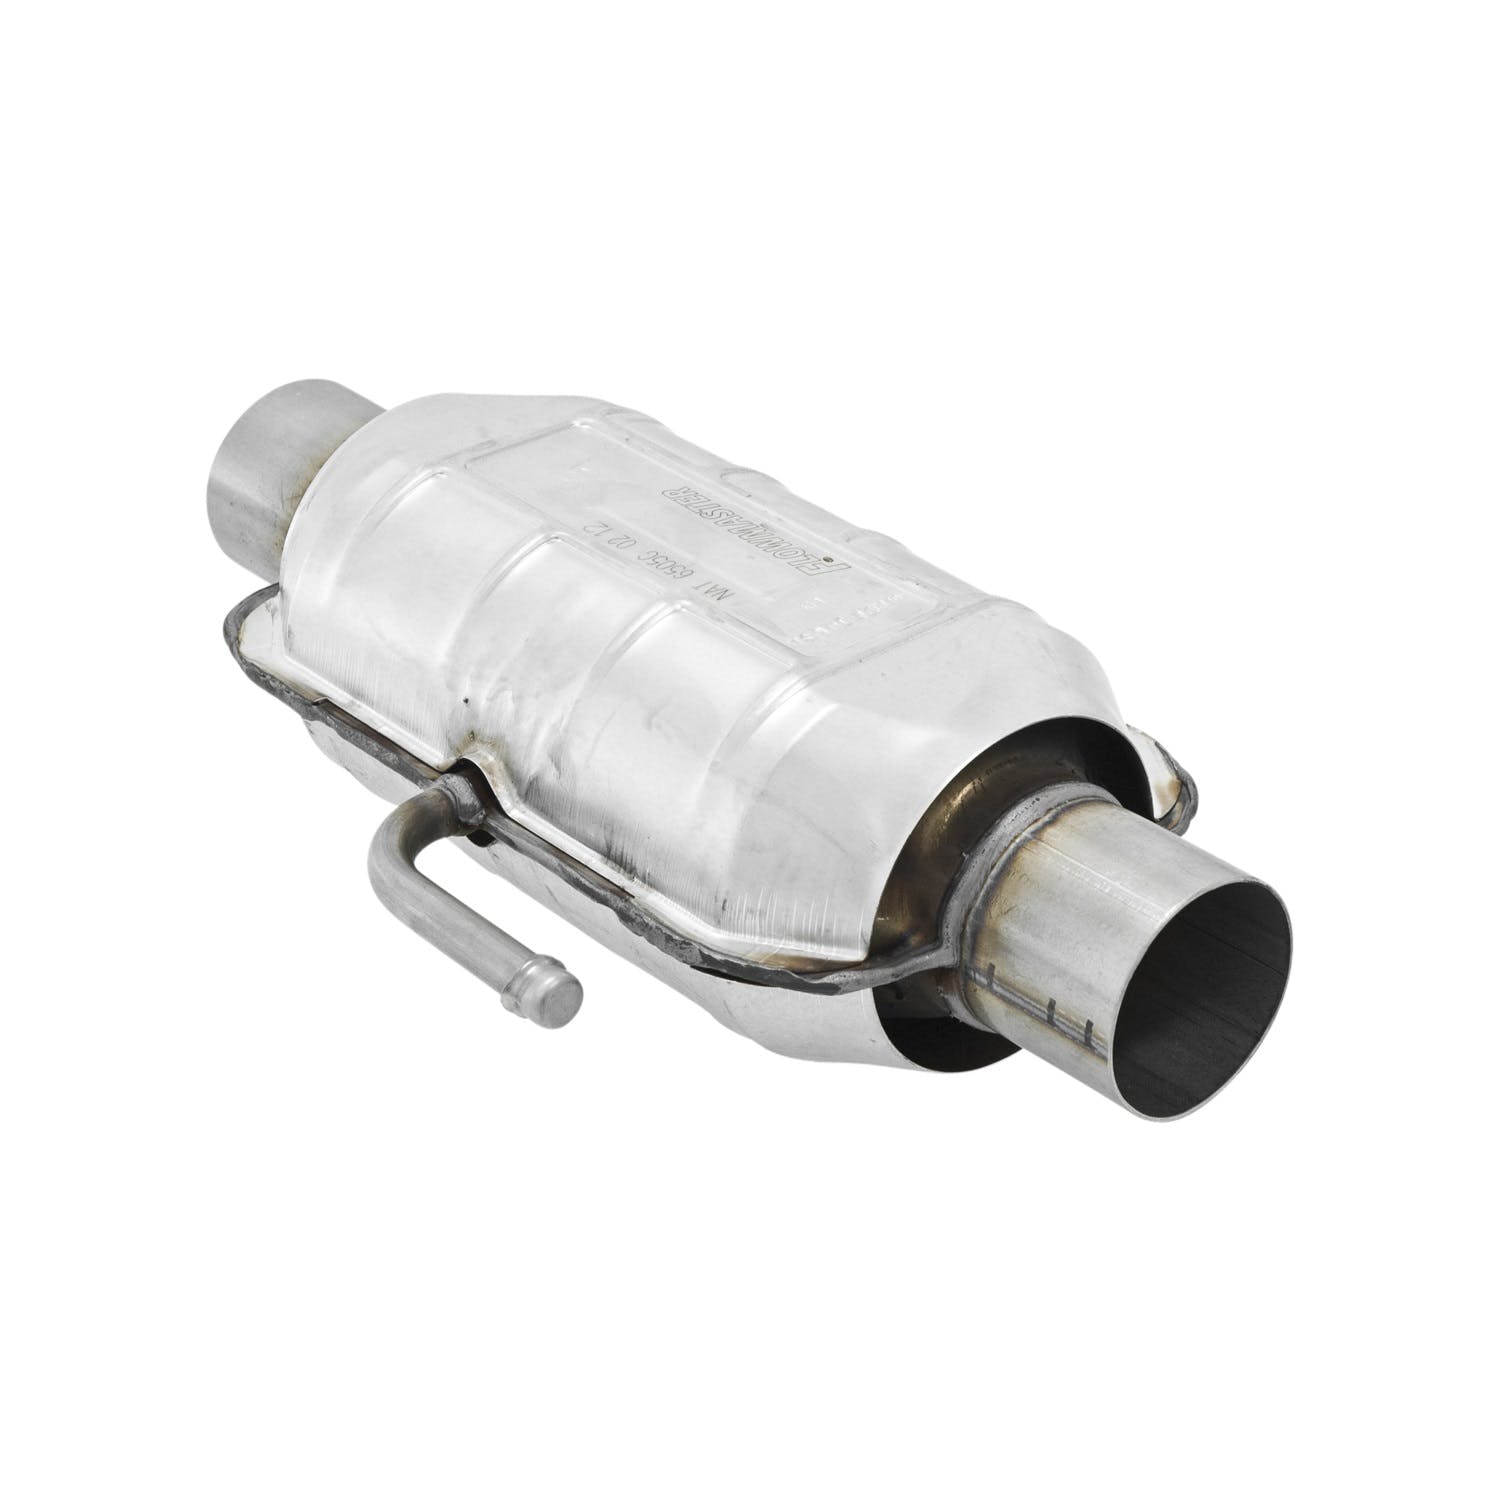 Flowmaster Catalytic Converters 2250230 Catalytic Converter-Universal-225 Series-3.00 in. Inlet/Outlet-49 State